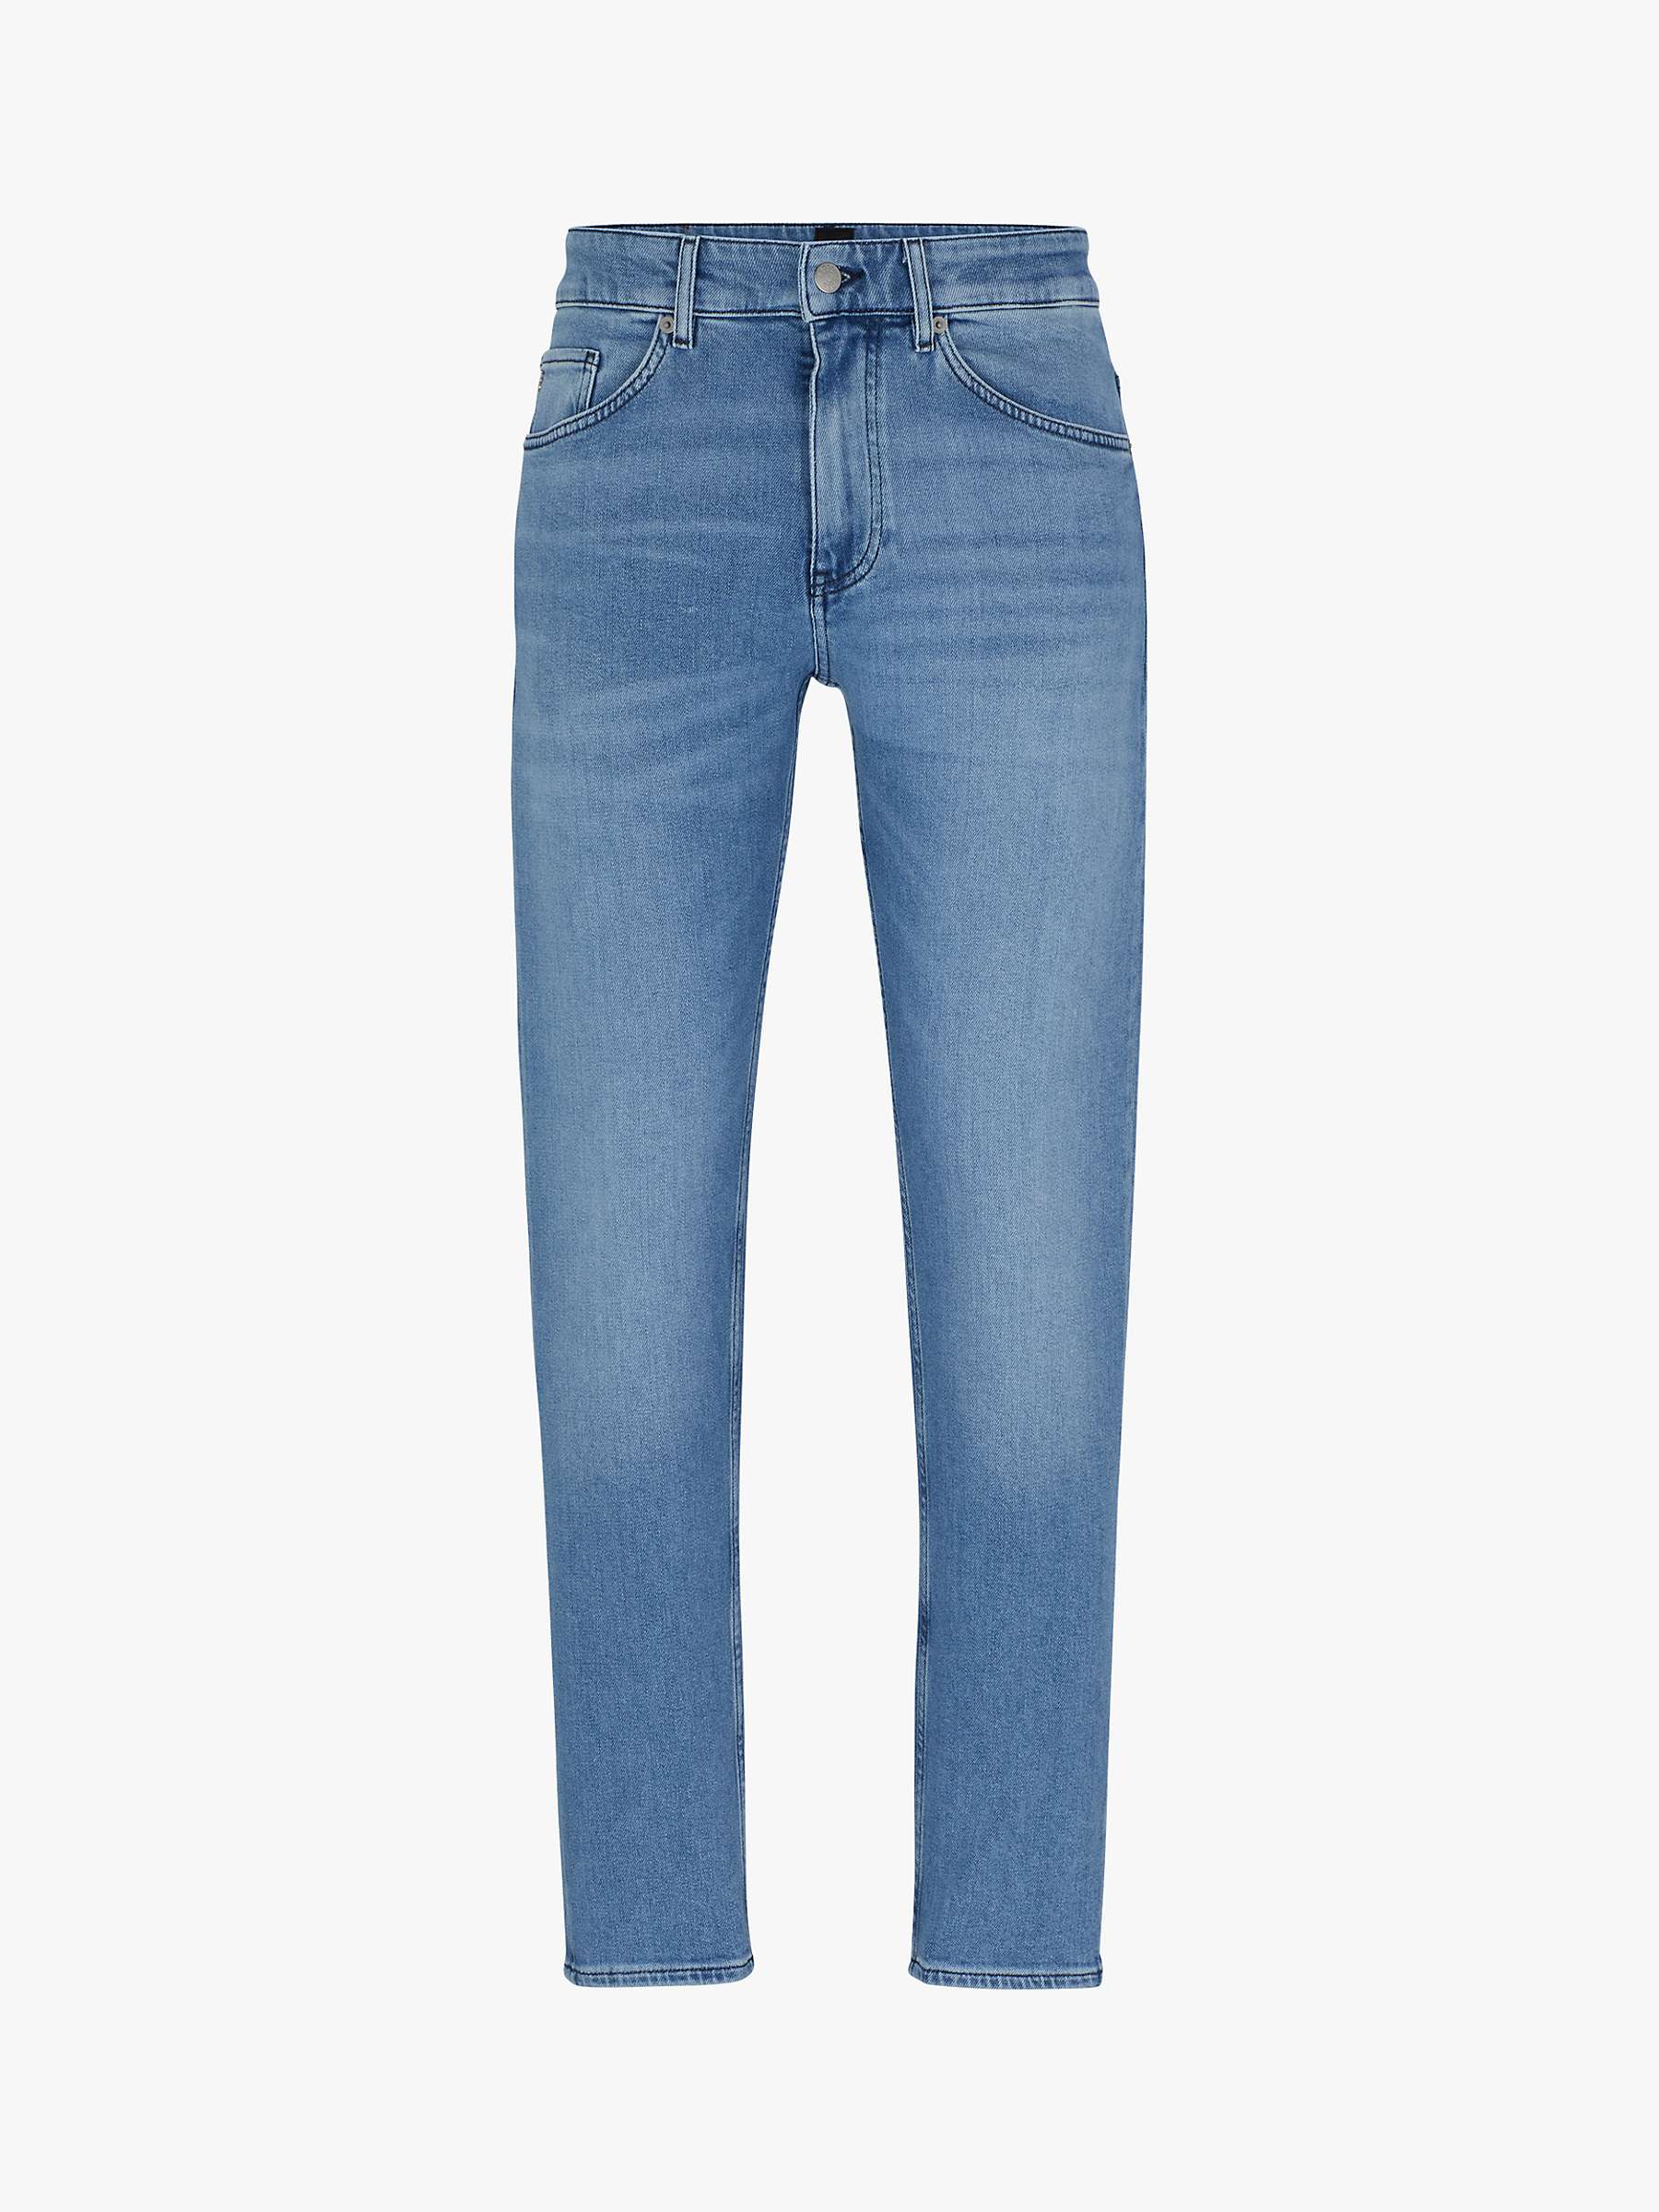 BOSS Taber 449 Tapered Fit Jeans, Turquoise/Aqua at John Lewis & Partners